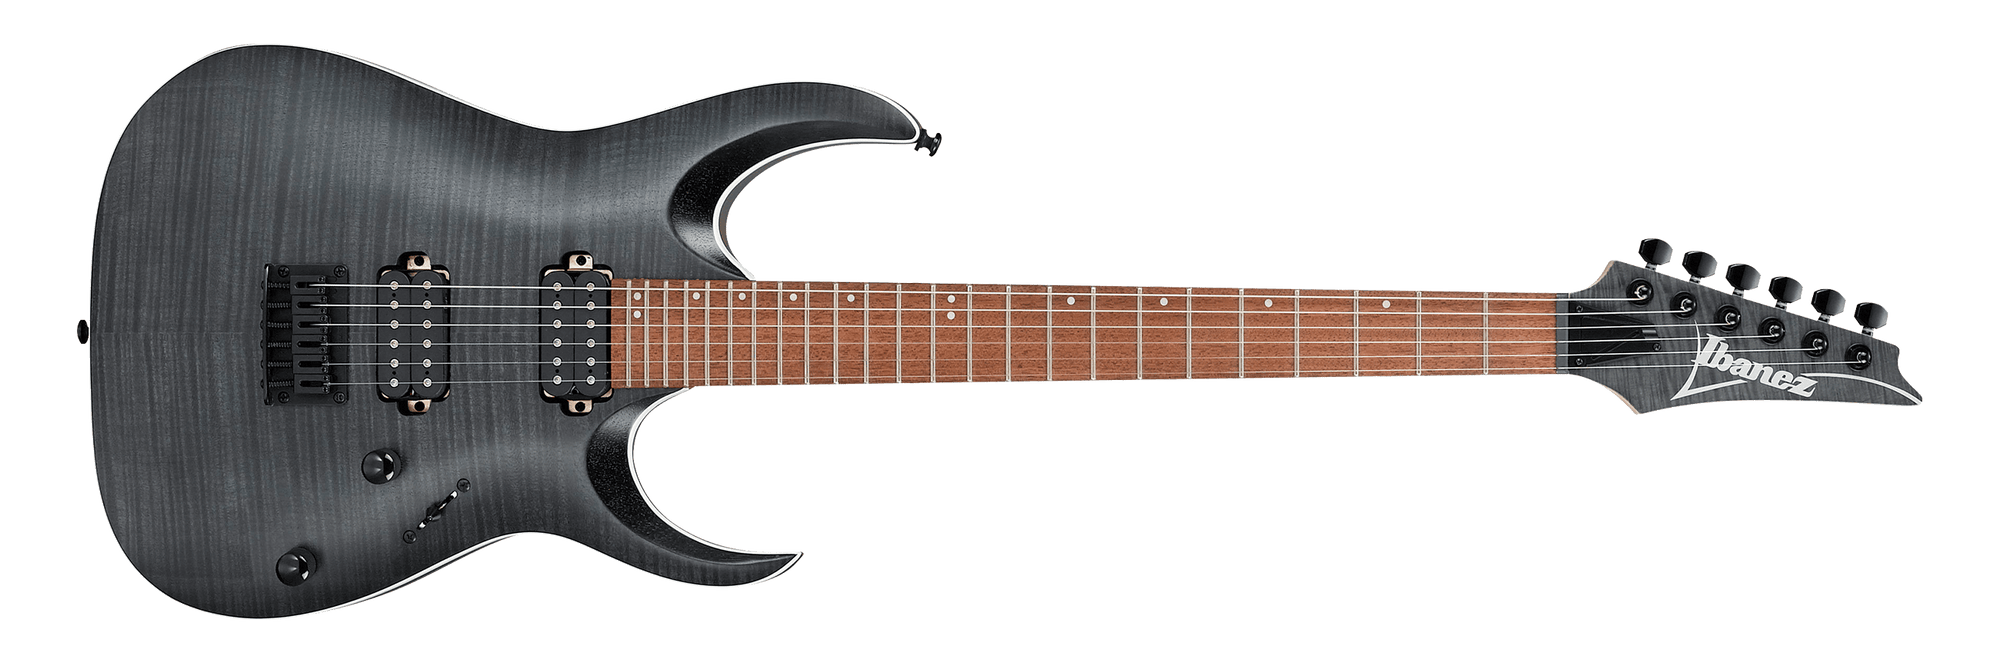 IBANEZ RGA FLAME MAPLE TOP MERANTI BODY MAPLE NECK IN TRANSPARENT GRAY FLAT - The Guitar World